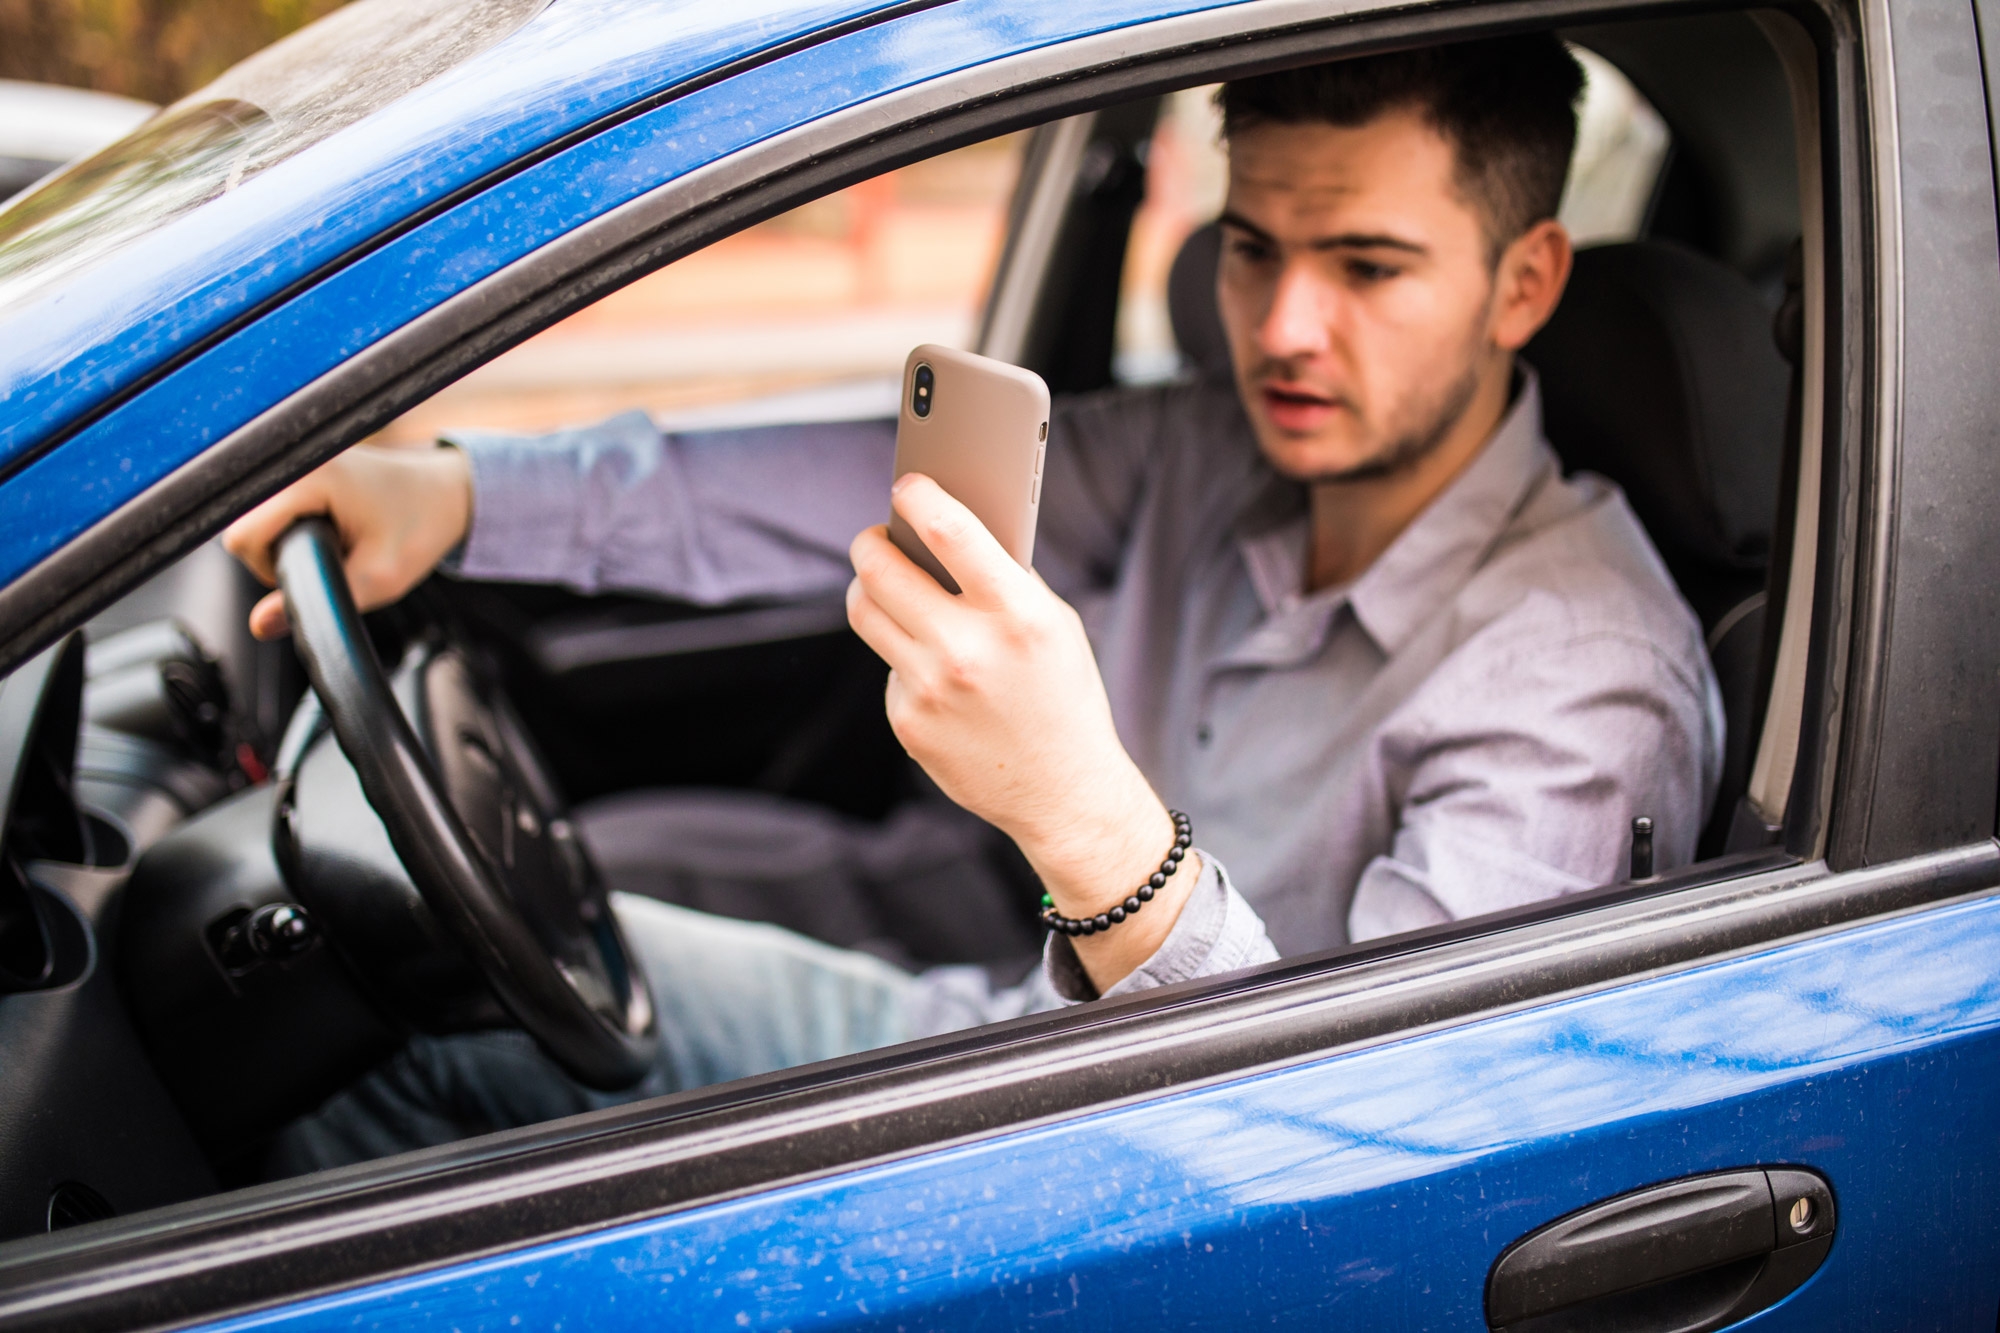 Louisiana Has Fourth-Highest Rate of Fatal Crashes Involving Distracted Driving